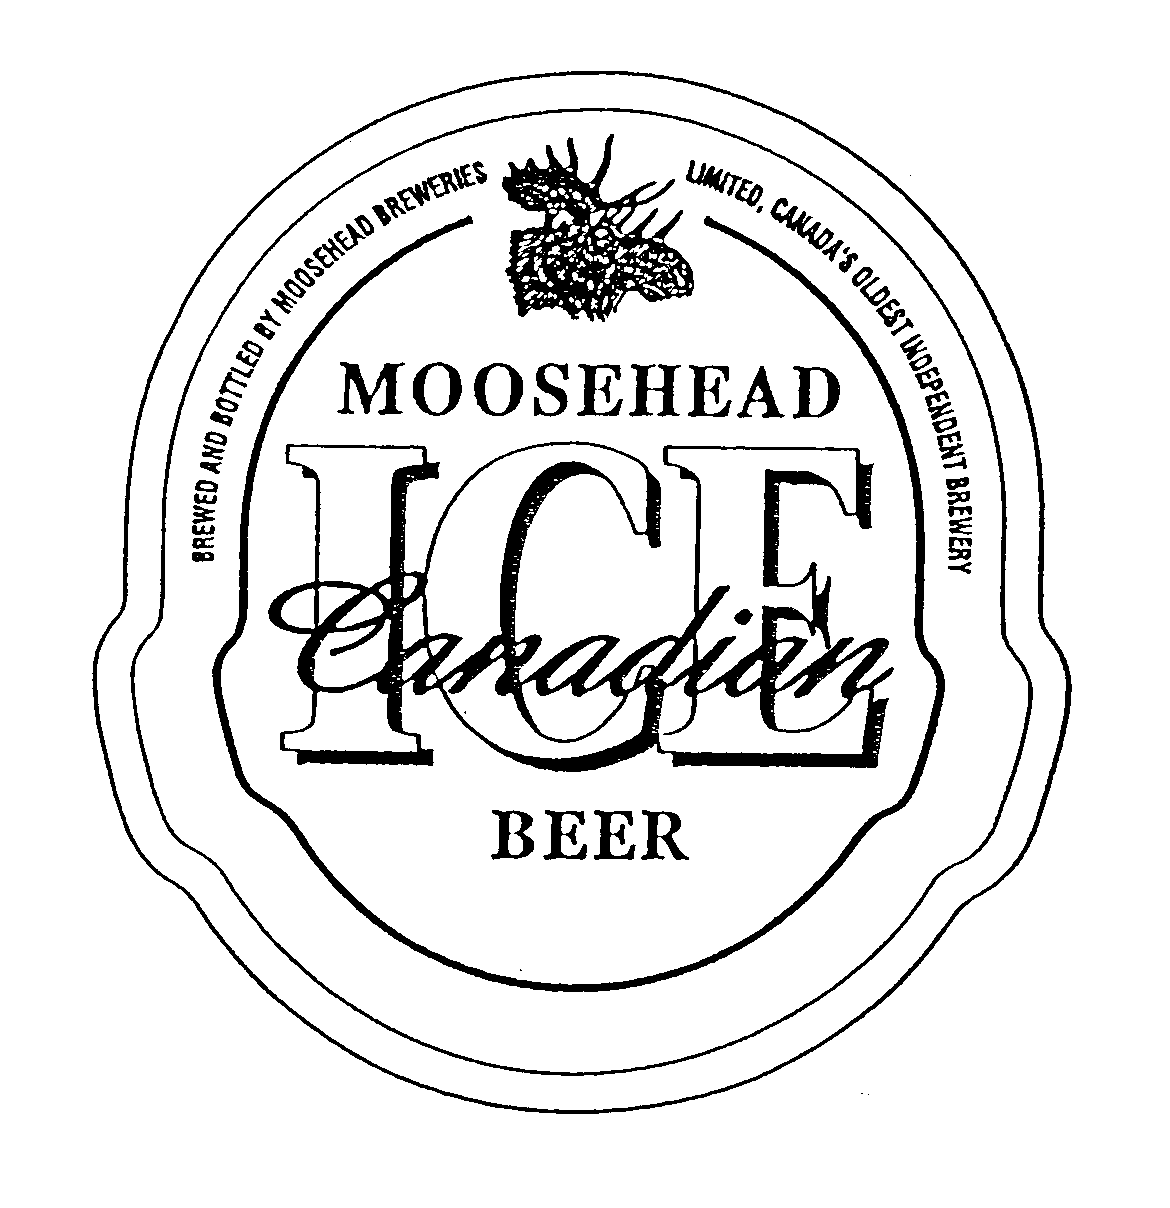  MOOSEHEAD CANADIAN ICE BEER BREWED AND BOTTLED BREWERIES LIMITED, CANADA'S OLDEST INDEPENDENT BREWERY